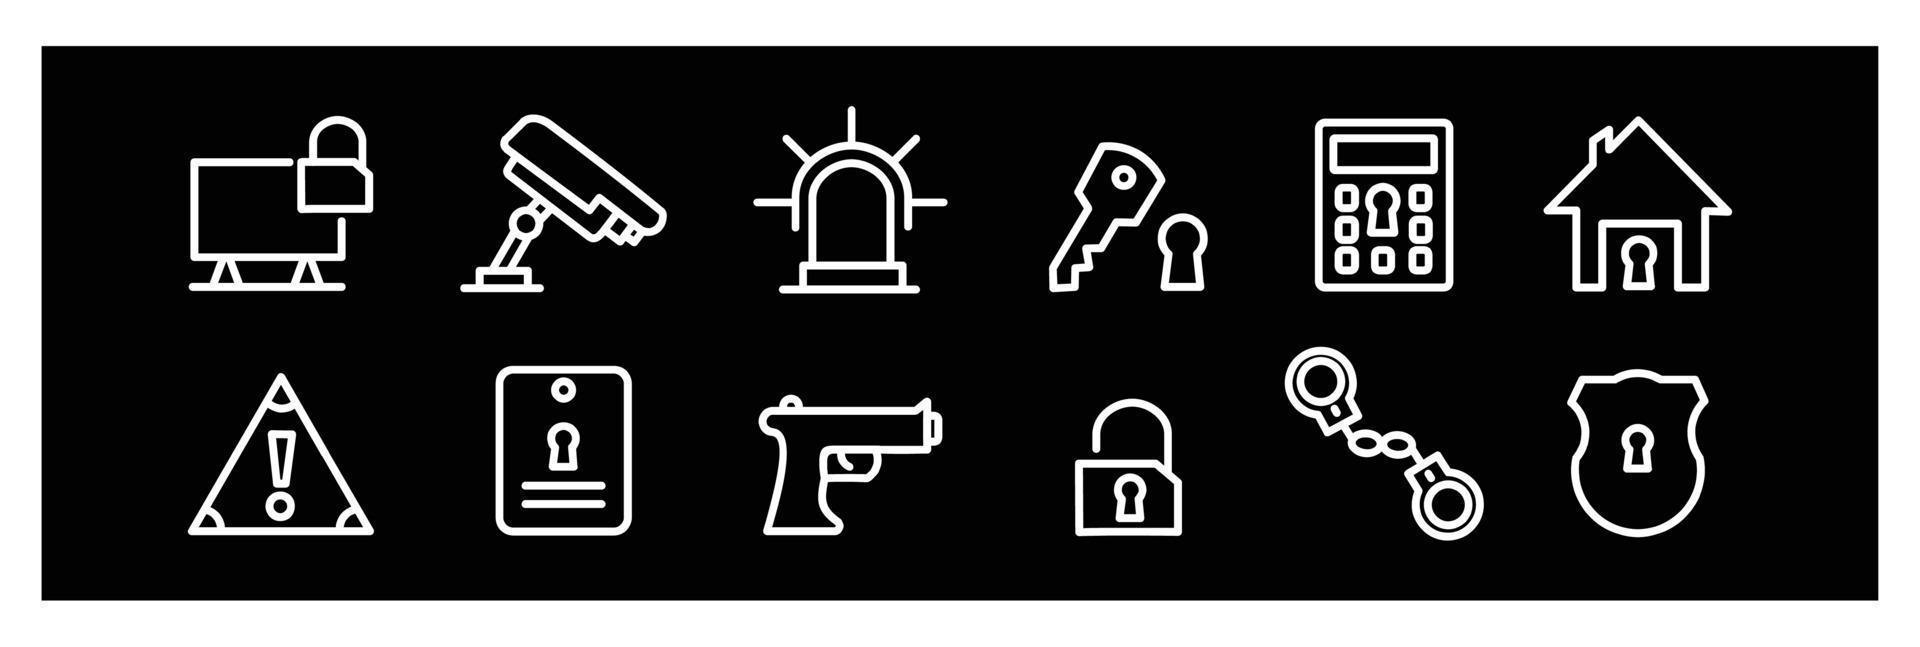 flat Security simple concept icons set, Contains such icons as protection.icons for design on black background vector